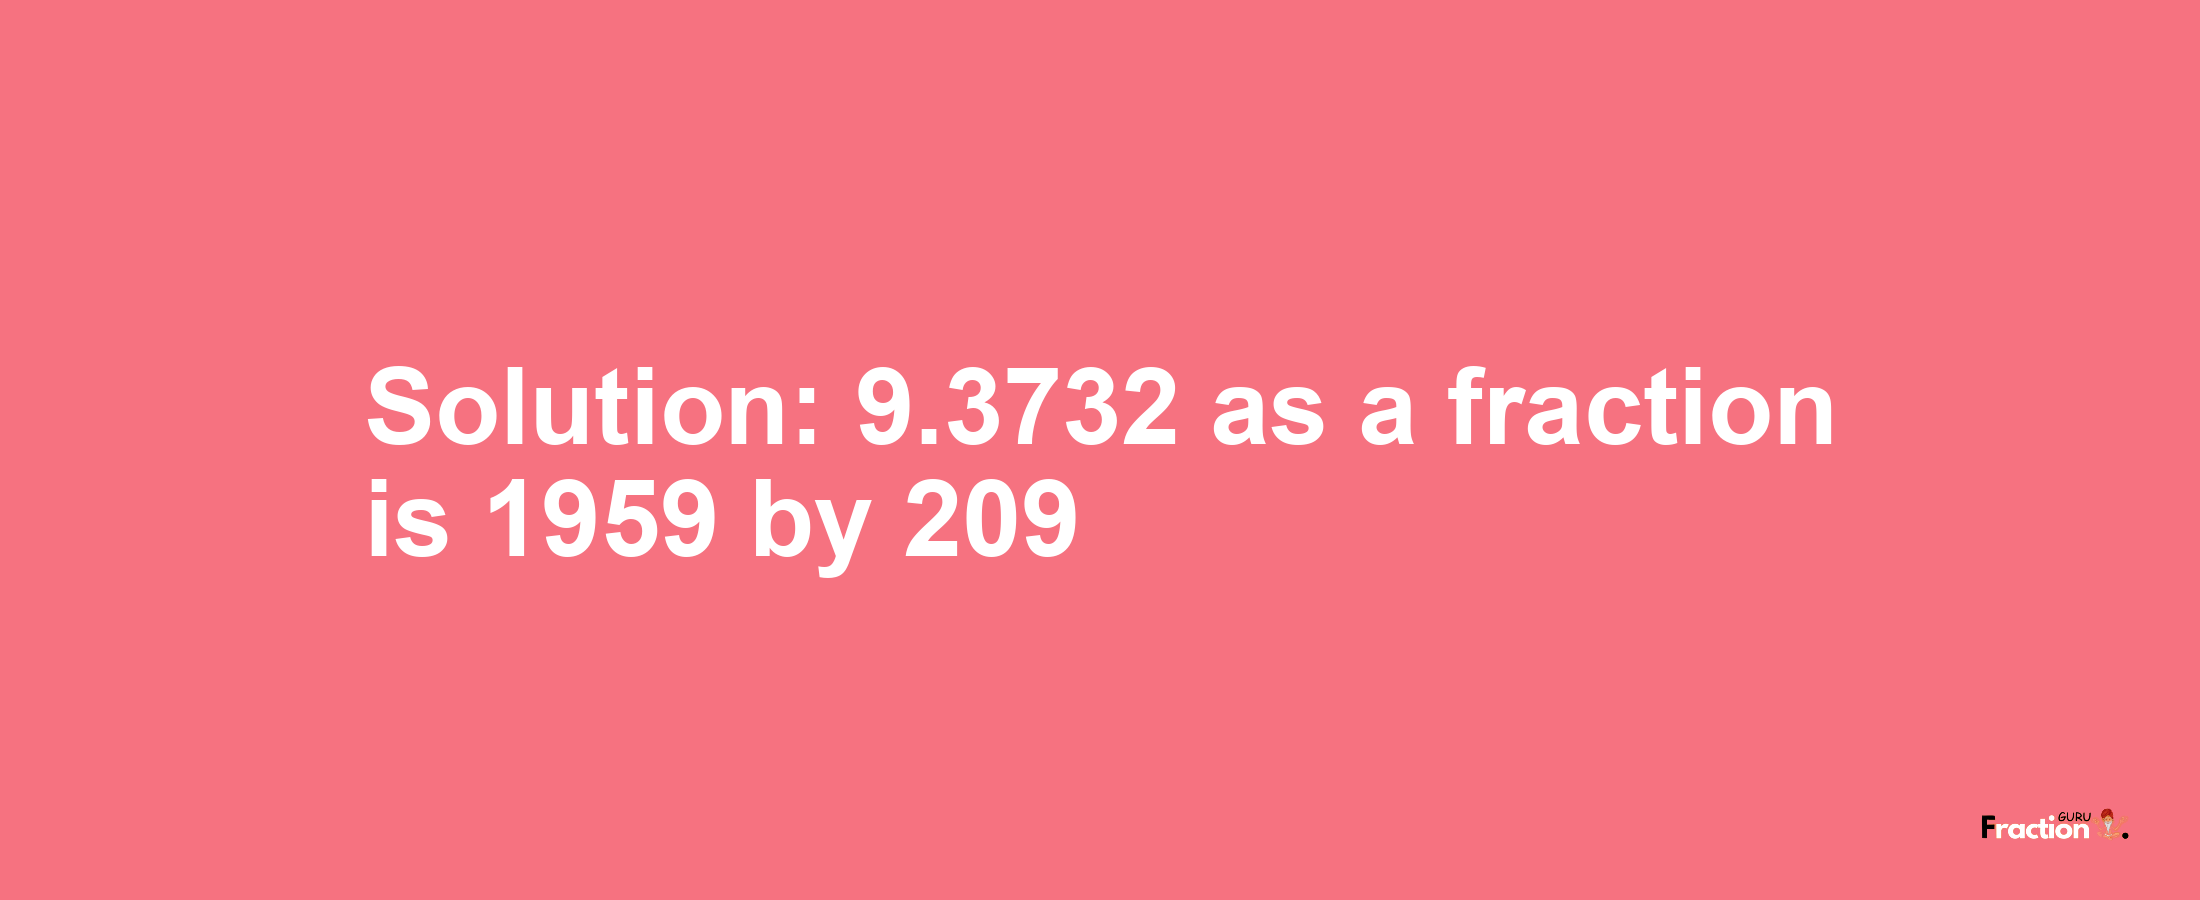 Solution:9.3732 as a fraction is 1959/209